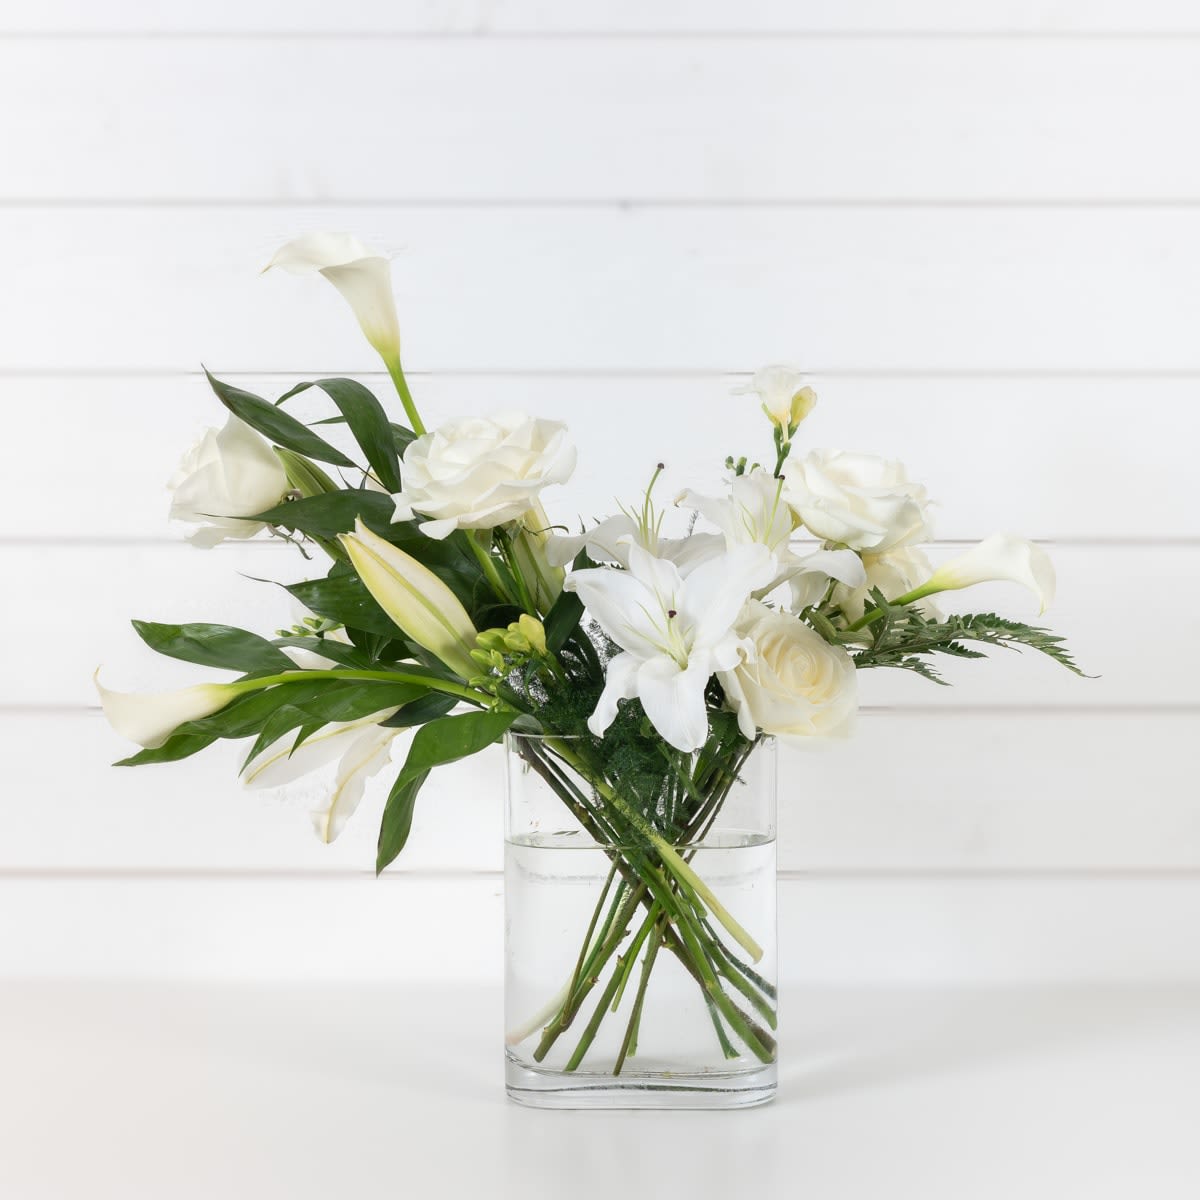 Natural Note - Effortless and carefree assortment of white flowers.  Unpretentious and understated....